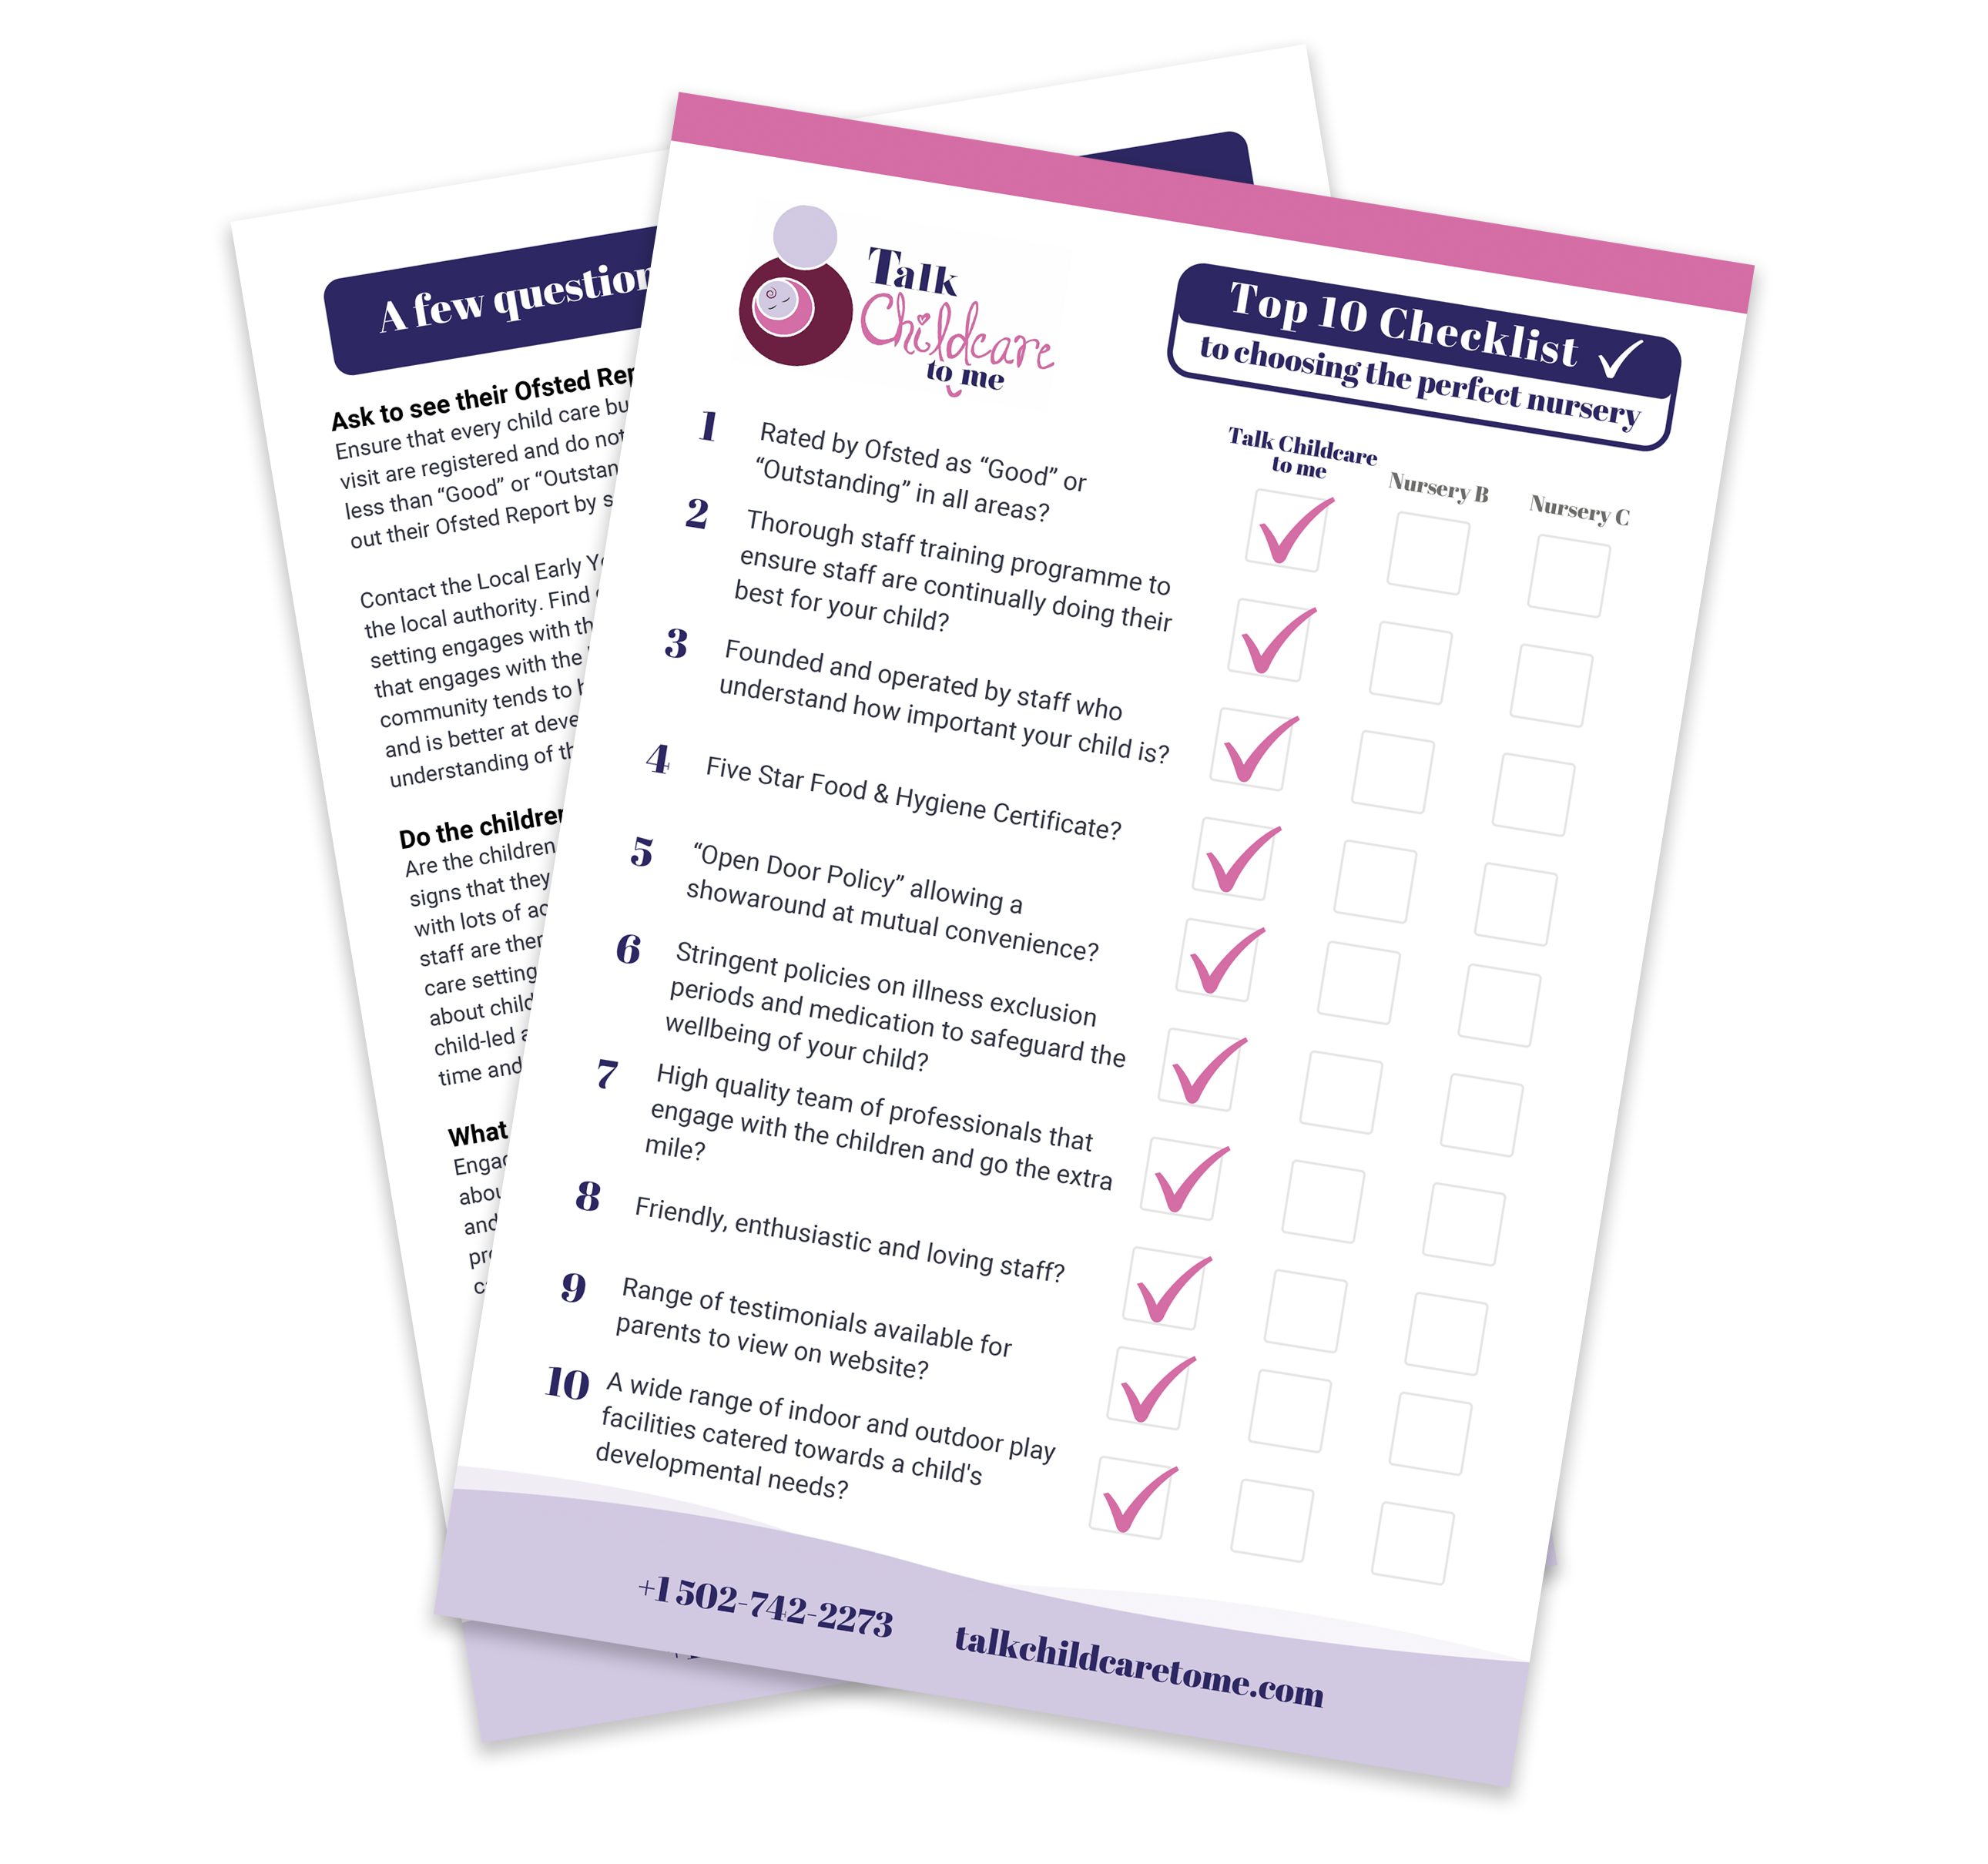 free top 10 checklist from  Talk Childcare to me